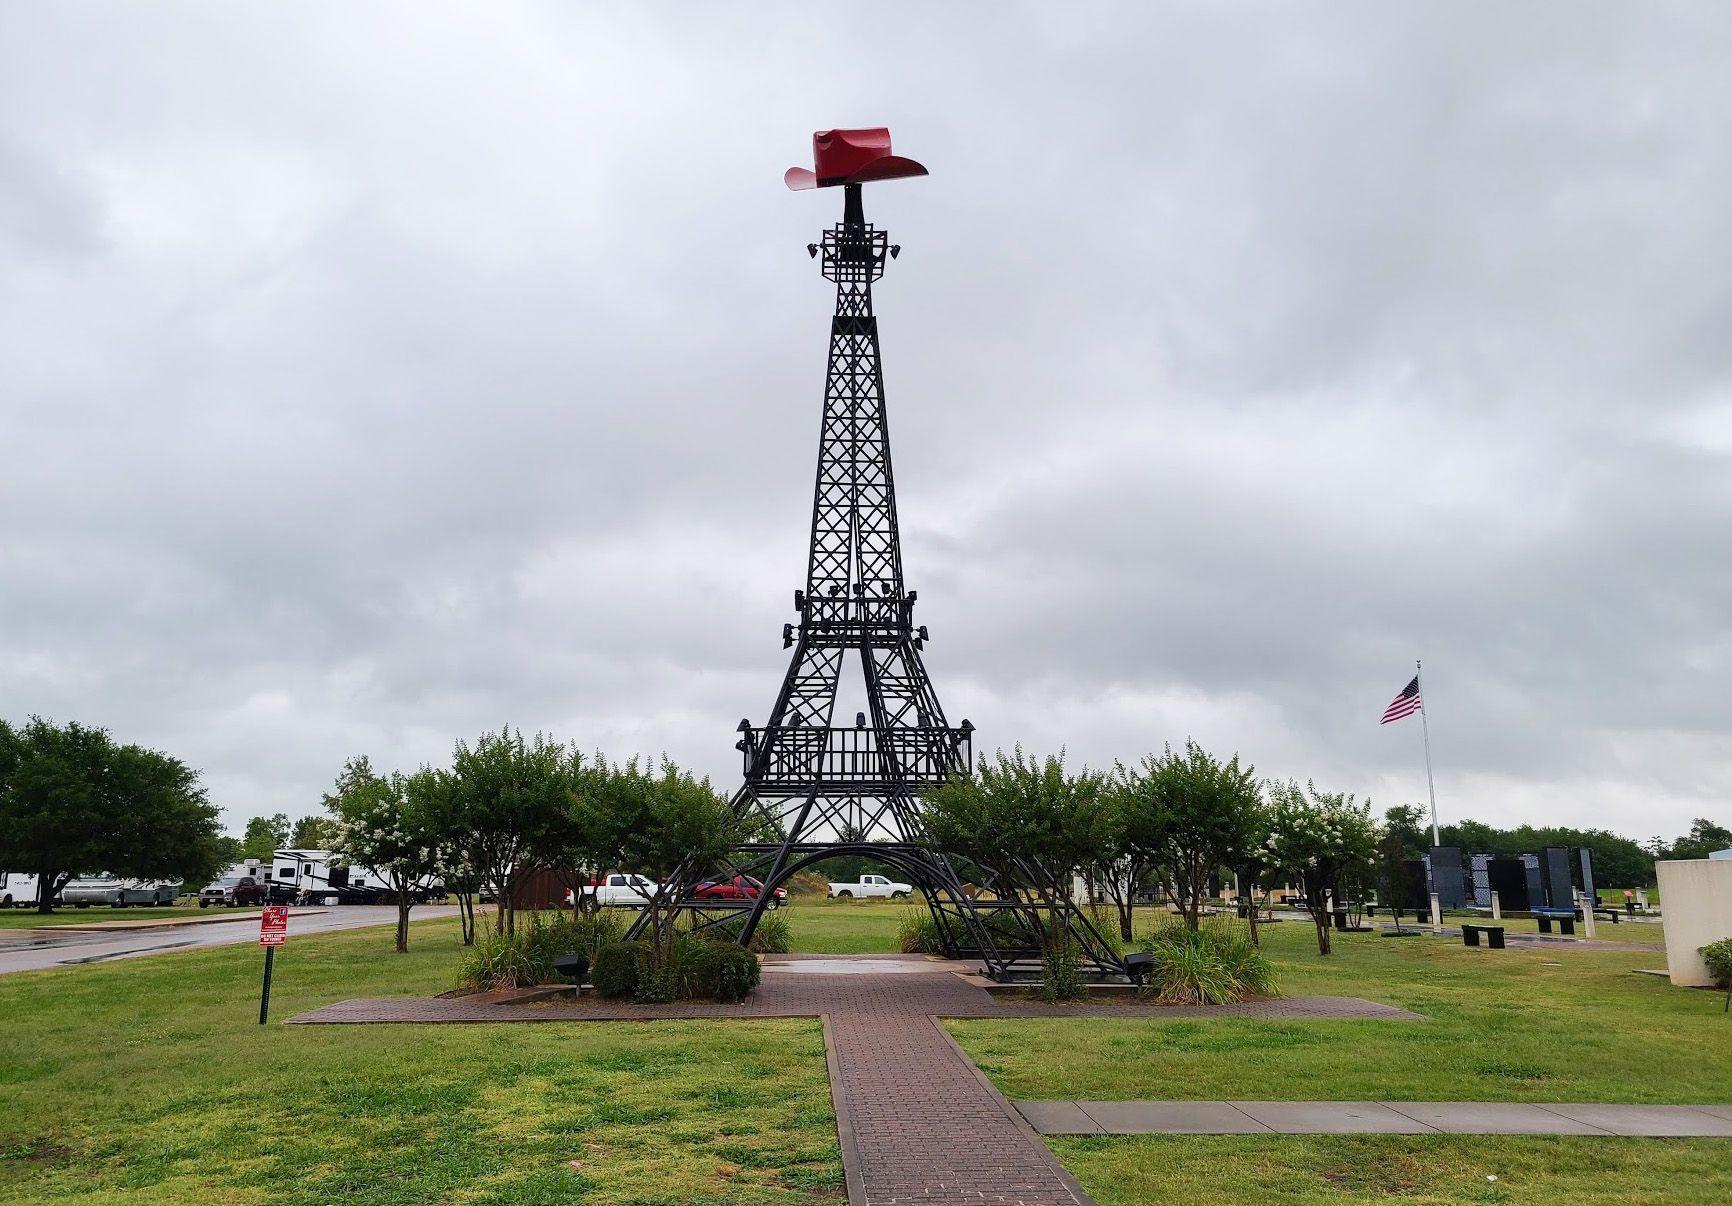 An eiffel tower with a red cowboy hat on top in Paris, Texas.